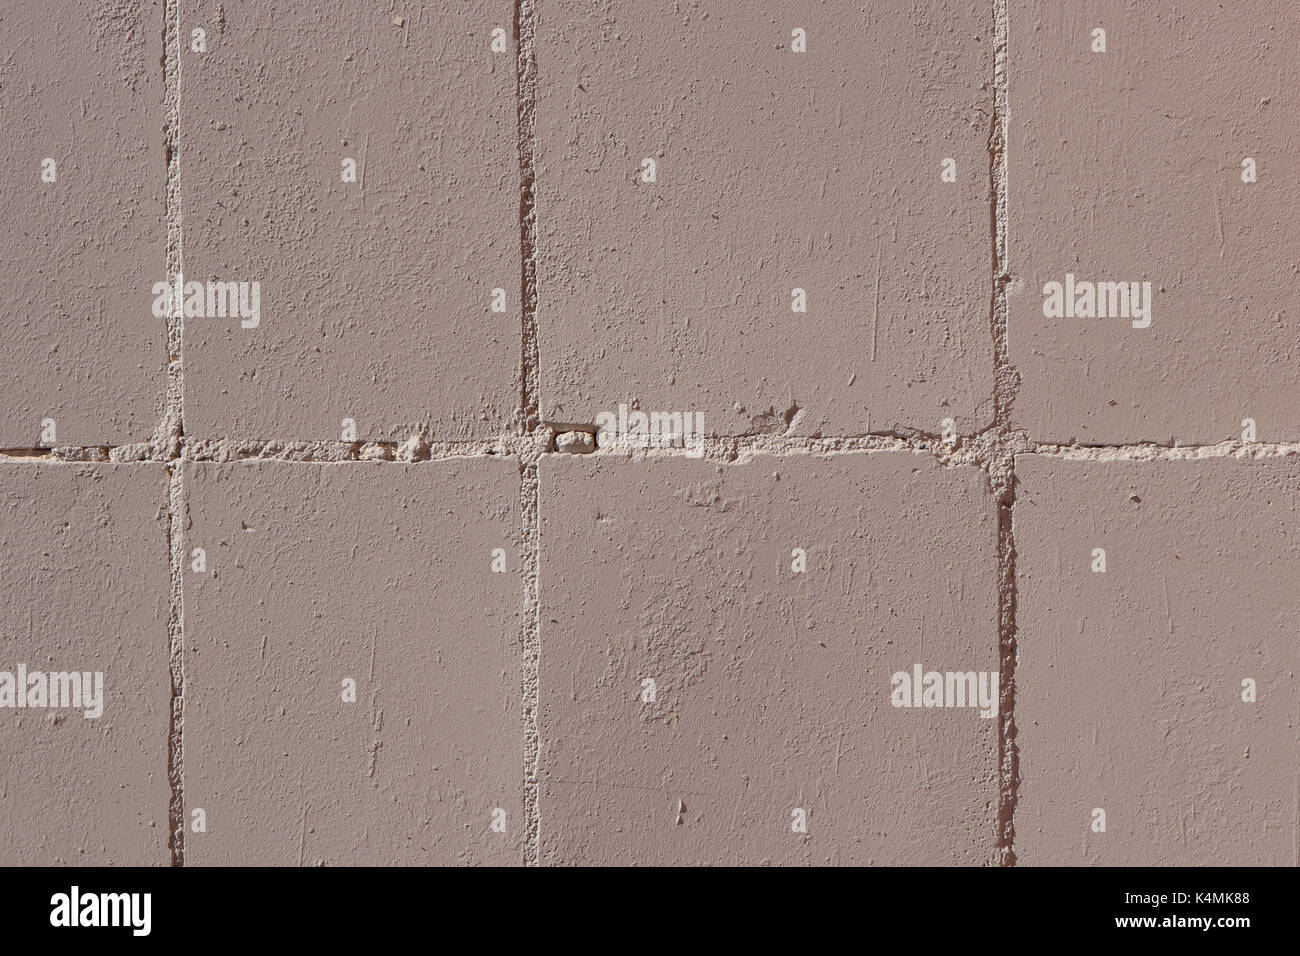 Beige Painted Tiles Wall Texture. Urban Street Background. Stock Photo